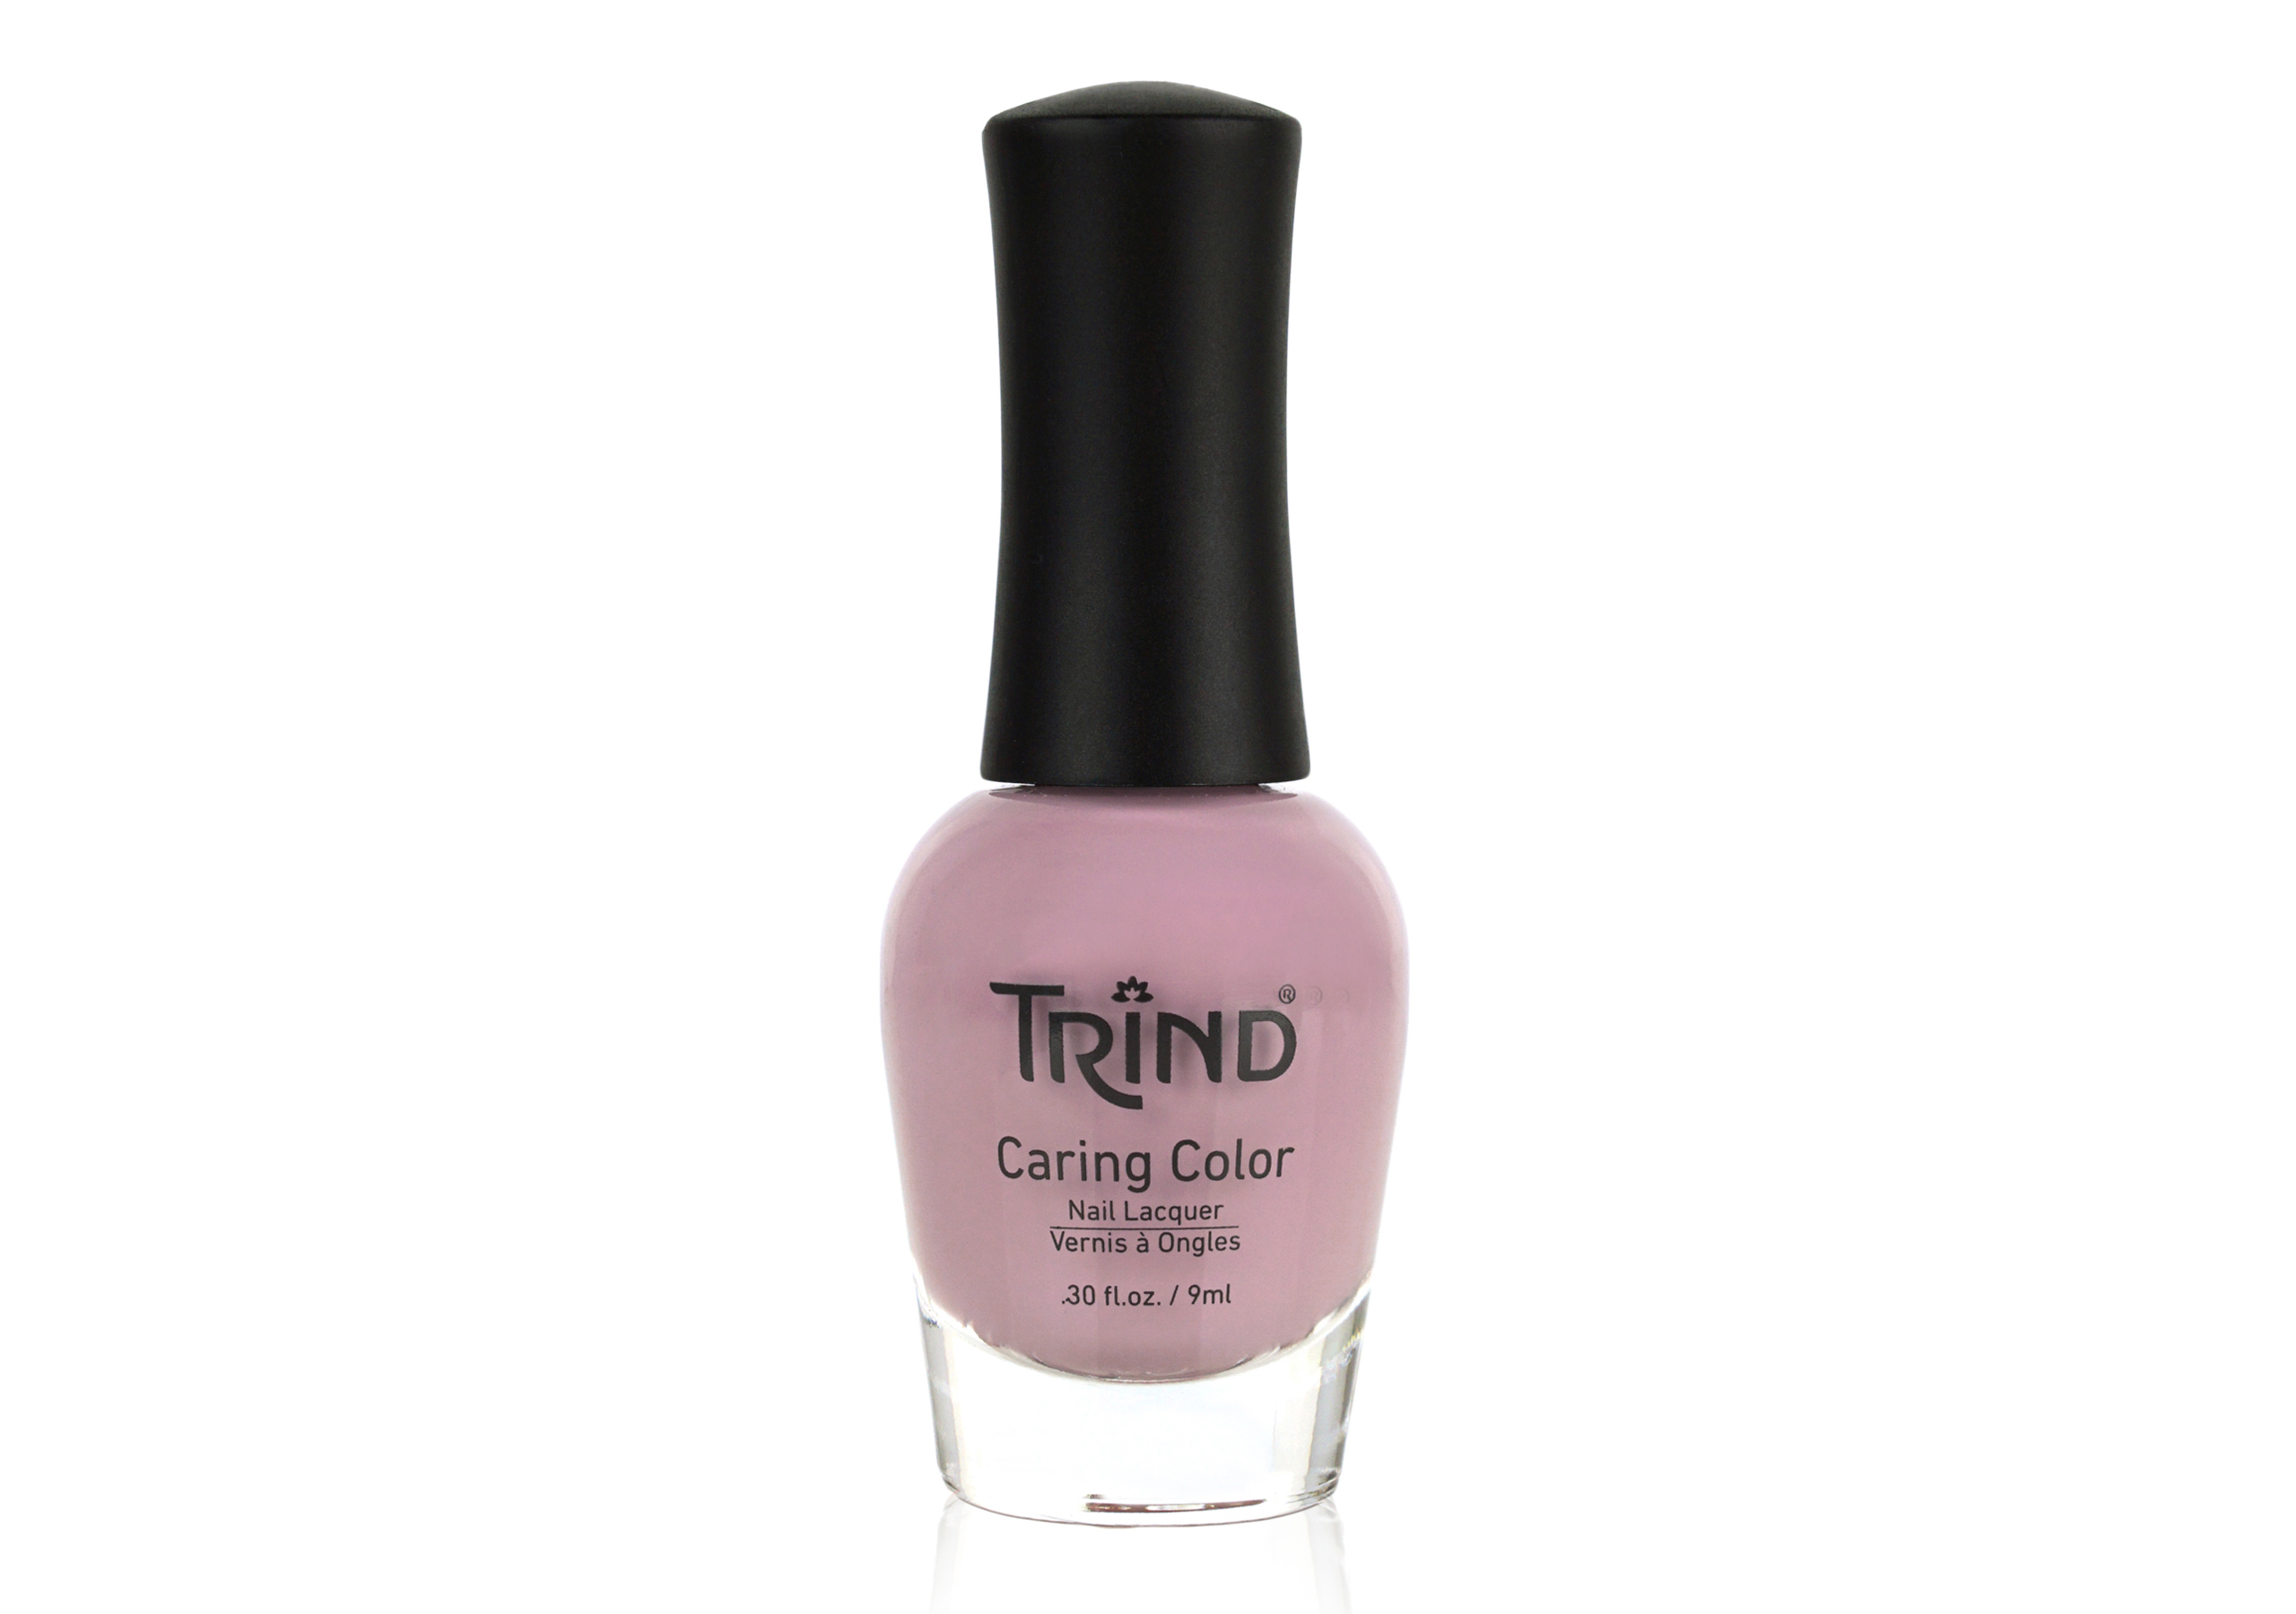 2. "Mauve Over" Nail Polish by OPI - wide 2